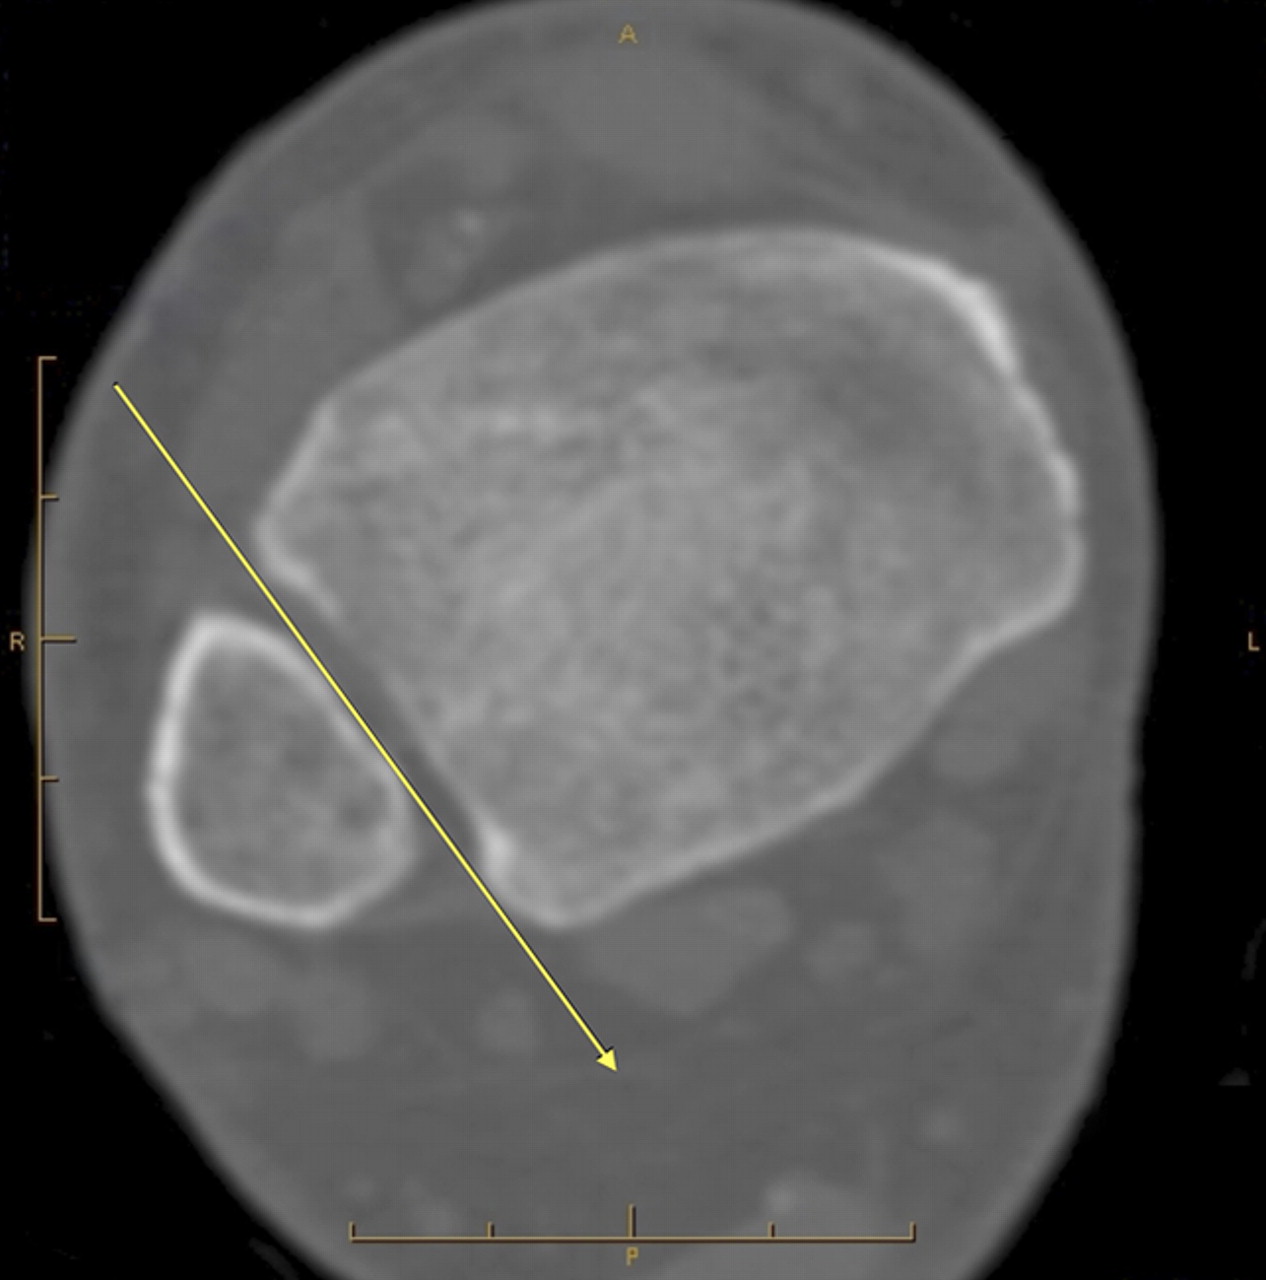 Figs. 3a - 3c 
          
            Figures 3a and 3b – axial CT
views a) in a patient with overlap between the distal tibia and
fibula, showing that a plain film x-ray beam (represented by the
yellow arrow) cannot be passed between the bones, and b) in a patient
without overlap, with the x-ray beam (yellow line) able to pass
between the tibia and fibula. Figure 3c – three-dimensional image
of the patient in Figure 3b, reconstructed from CT scans. This image
resembles a radiograph and can be rotated through 360° using GE
Workstation software (GE Healthcare).
        